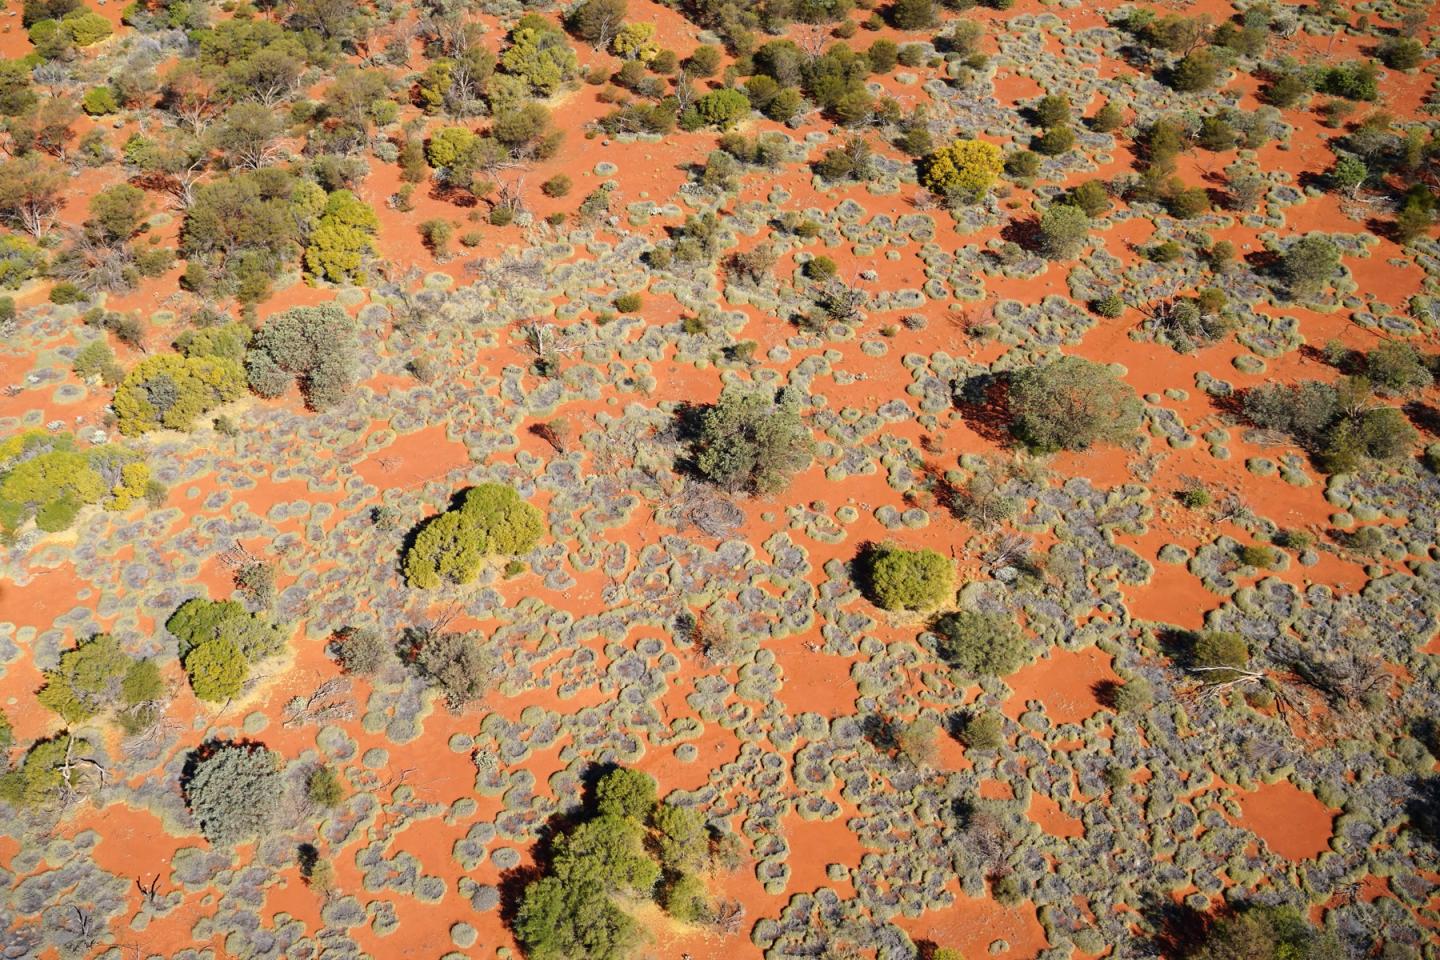 Helicopter View of Fairy Circles in Australia